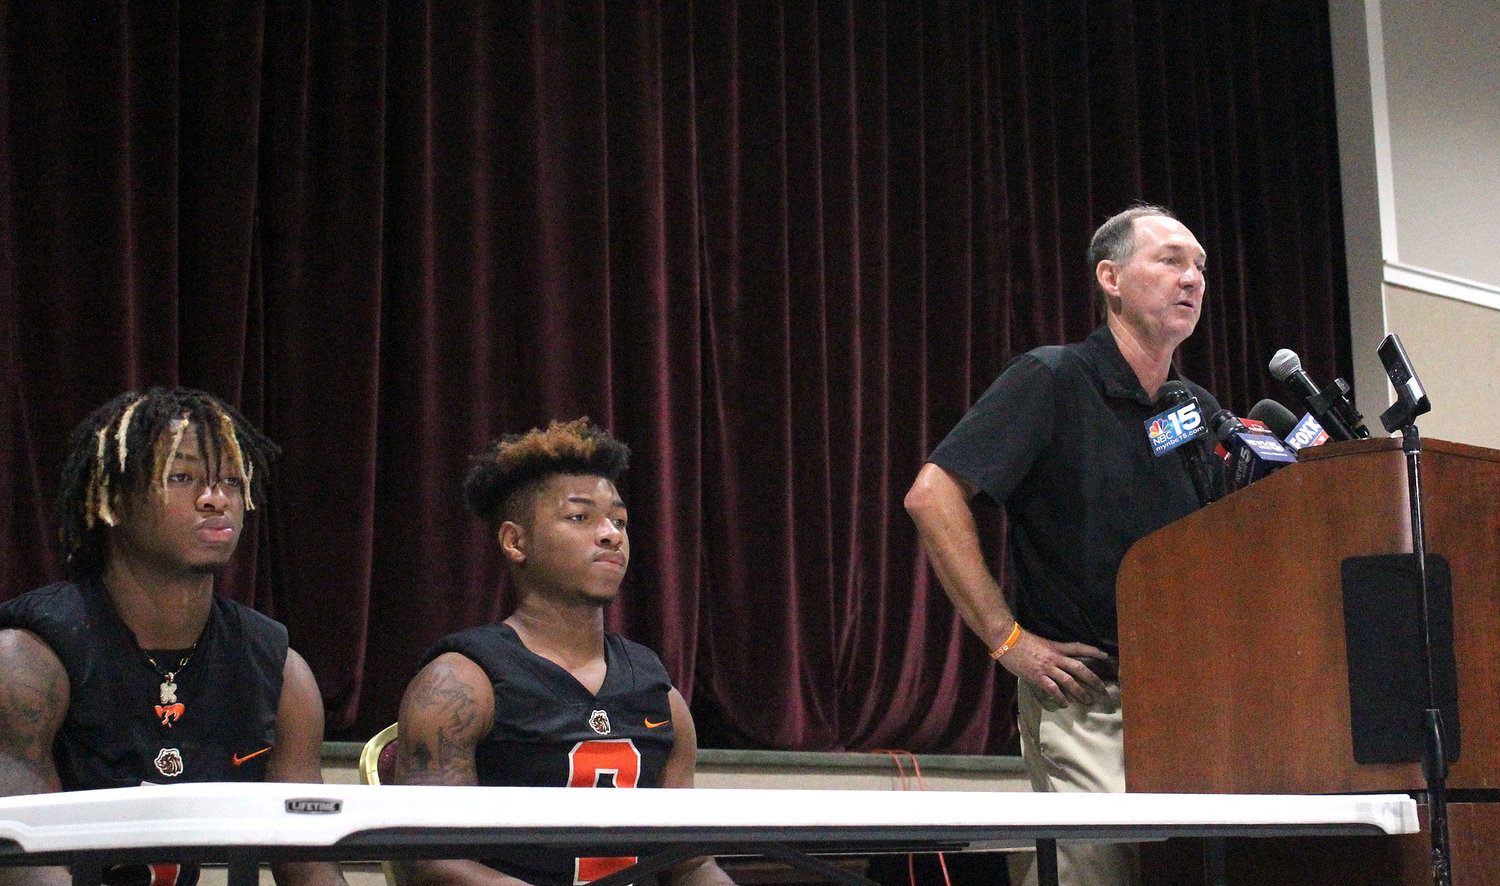 Ky McNulty (3) and DJ Jackson (9) joined head coach Scott Rials in representing the Baldwin County Tigers at the 2022 Baldwin County Media Day at Daphne High School last Wednesday, July 13.